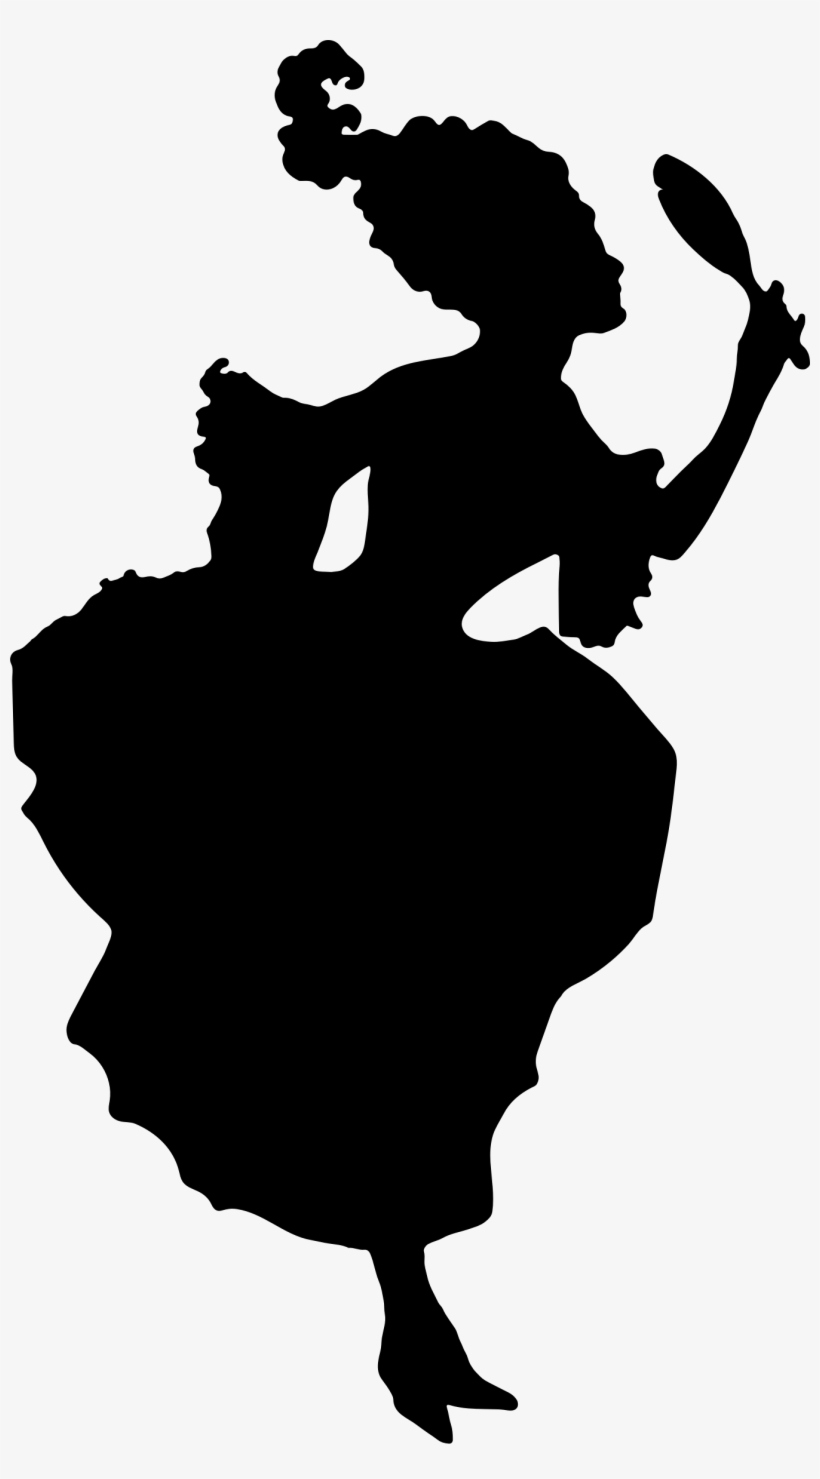 Fashion Silhouette Png - Fashion Silhouette 18th Century, transparent png #66238